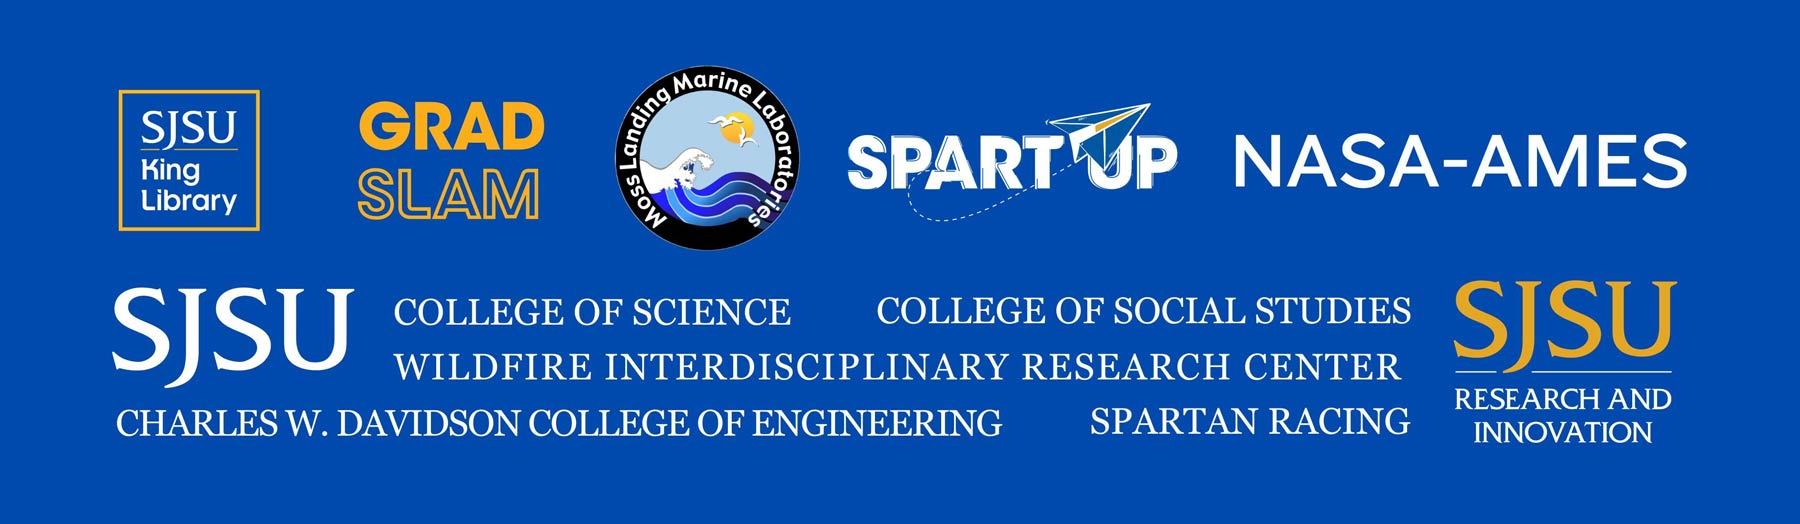 Logos of Research Week partners: King Library, Grad Slam, MLML, SpartUp, Nasa-Ames, SJSU colleges, Research and Innovation.